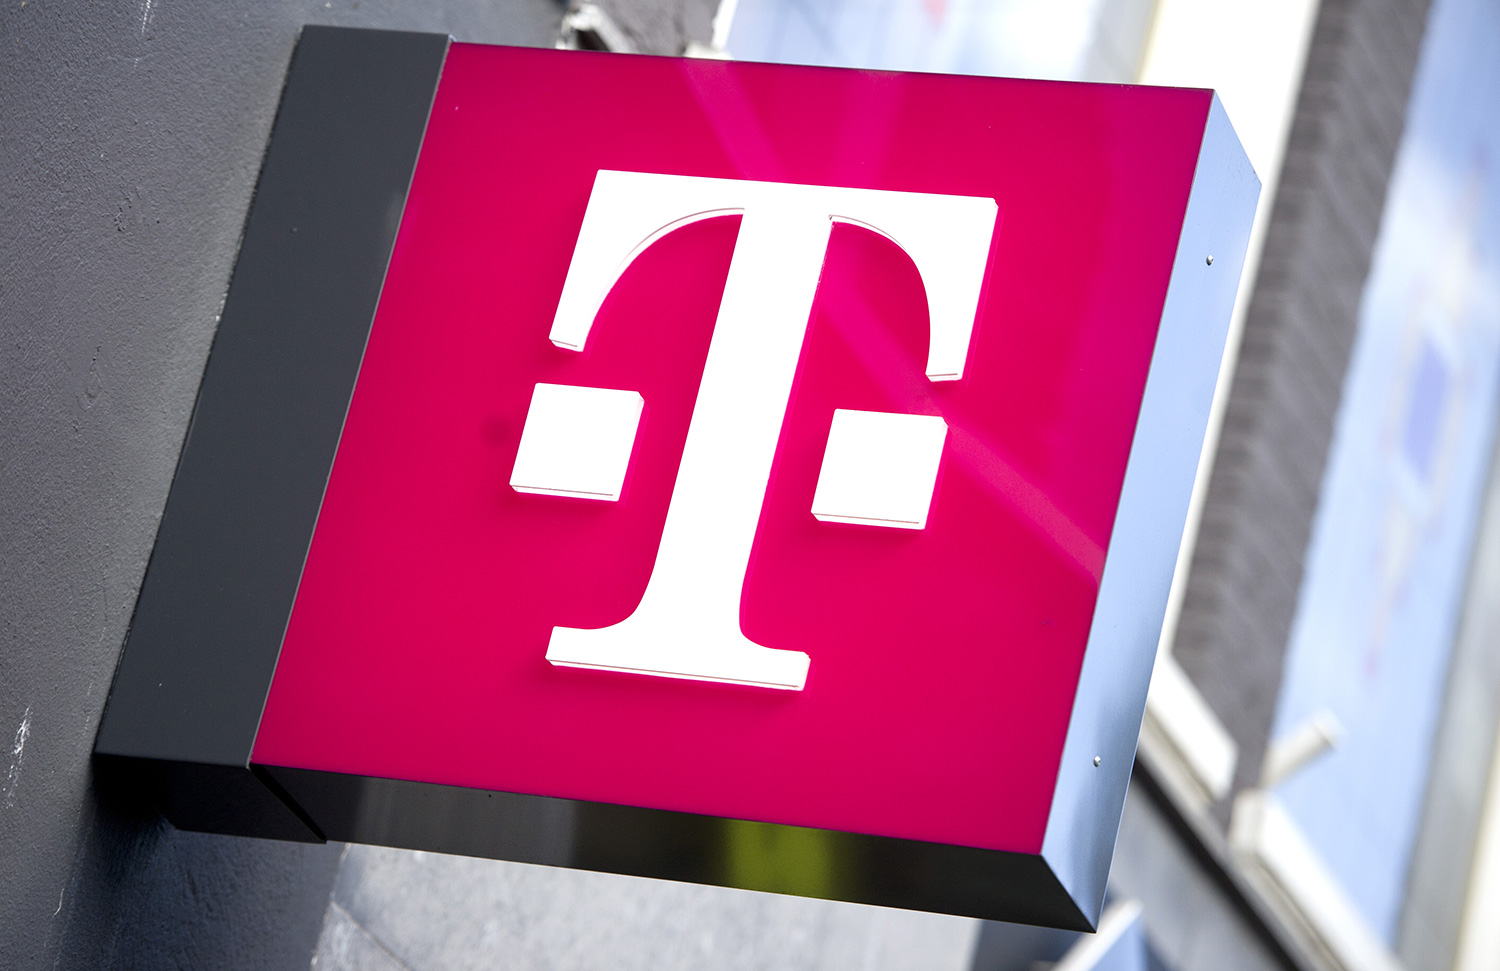 here-s-how-to-sign-up-for-a-free-month-of-t-mobile-service-bgr